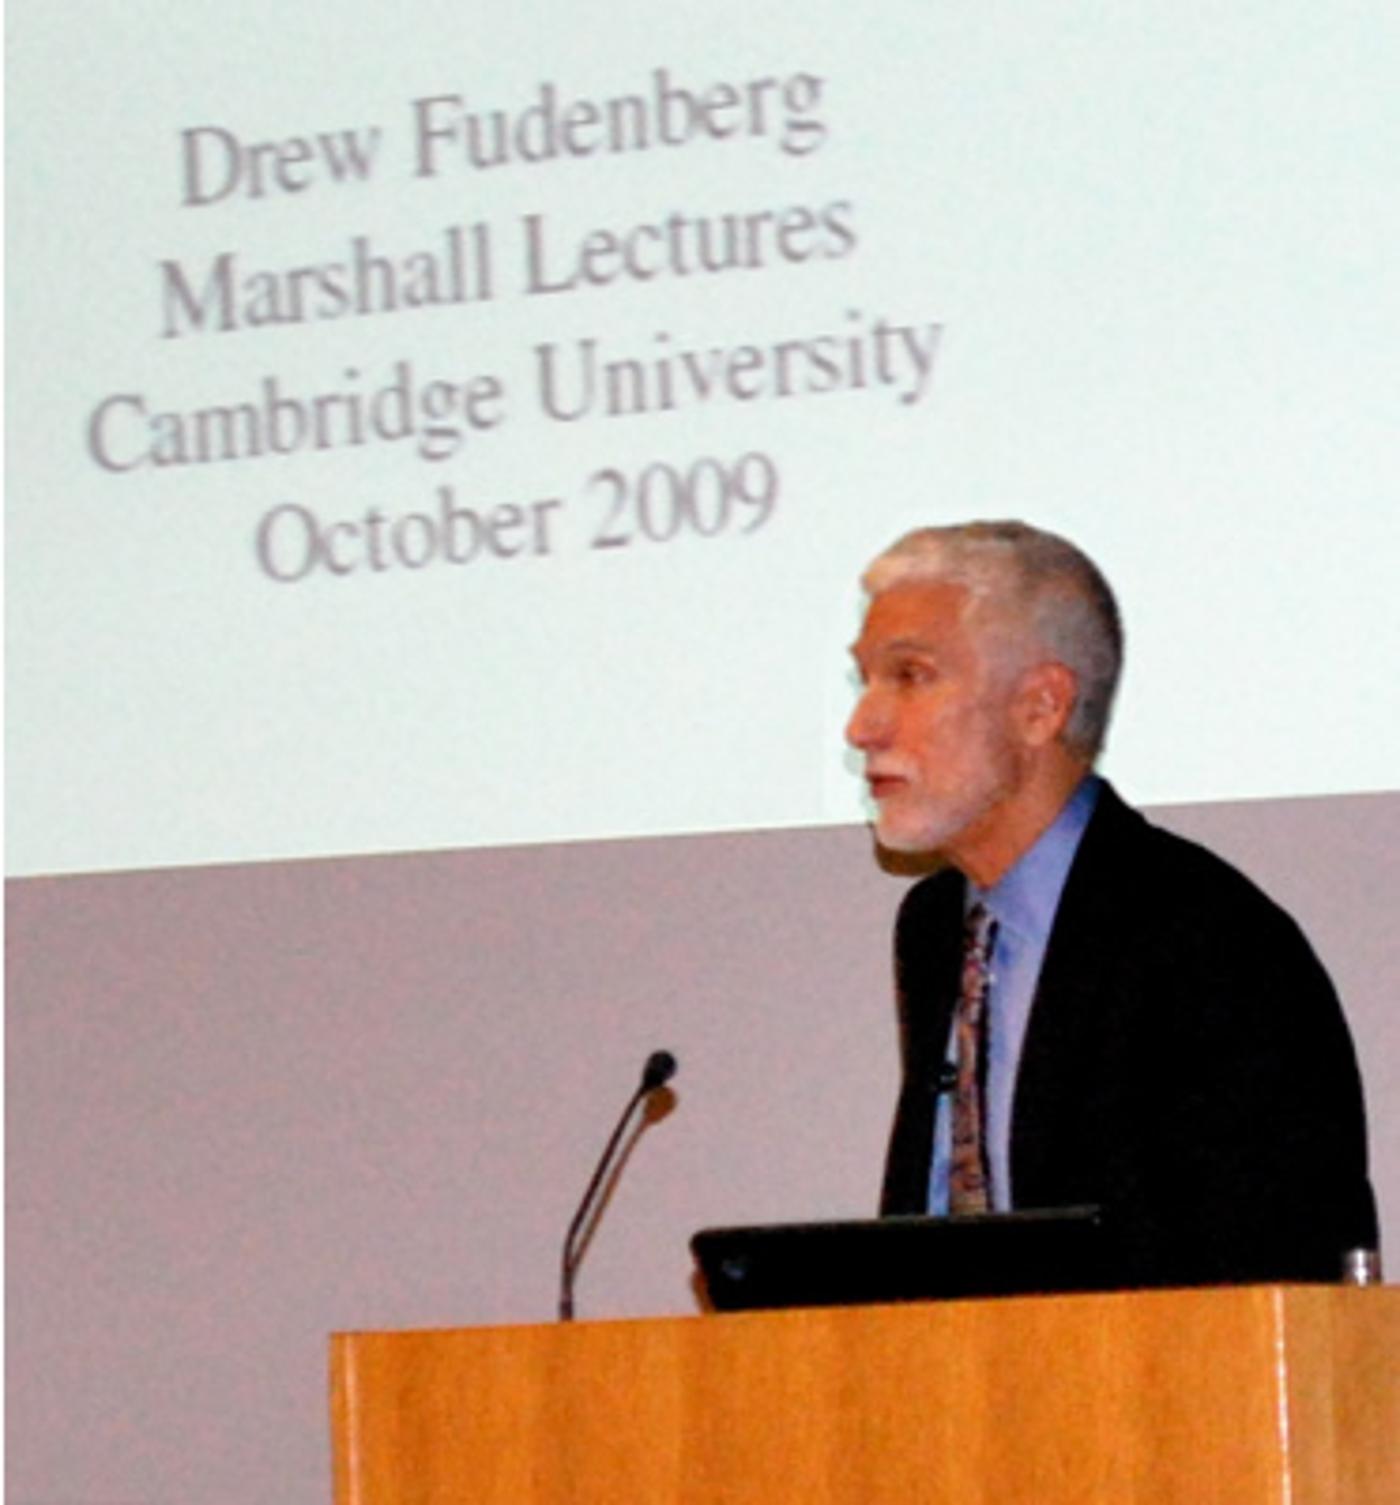 Marshall Lectures 2009 - Professor Drew Fudenberg - Learning and Equilibrium in Games - Lecture 1